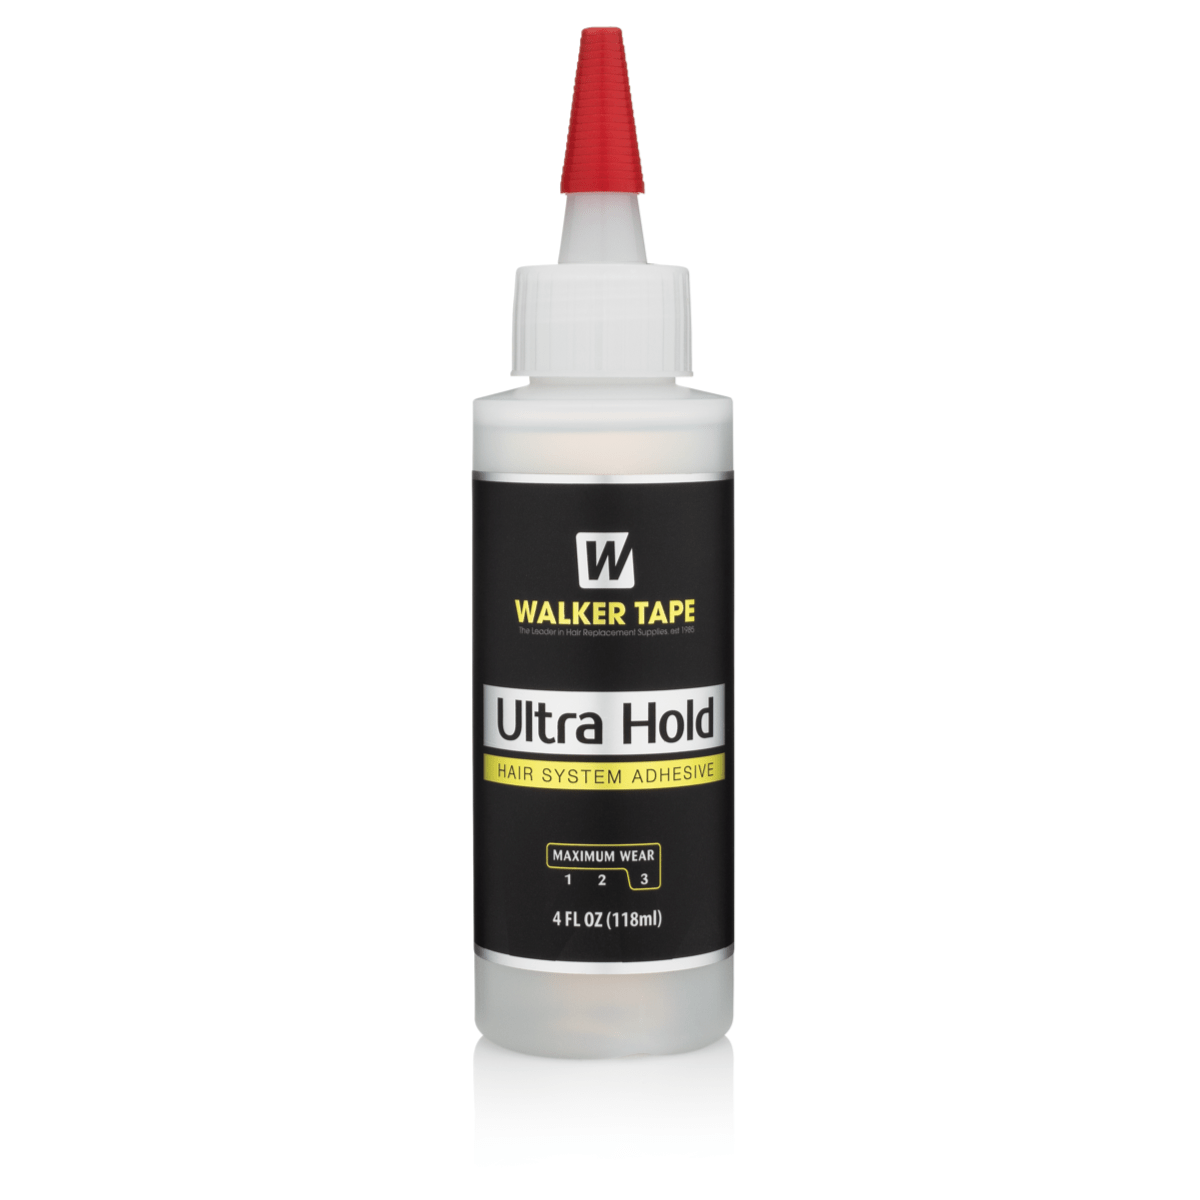 Walker Tape Ultra Hold Hair Adhesive